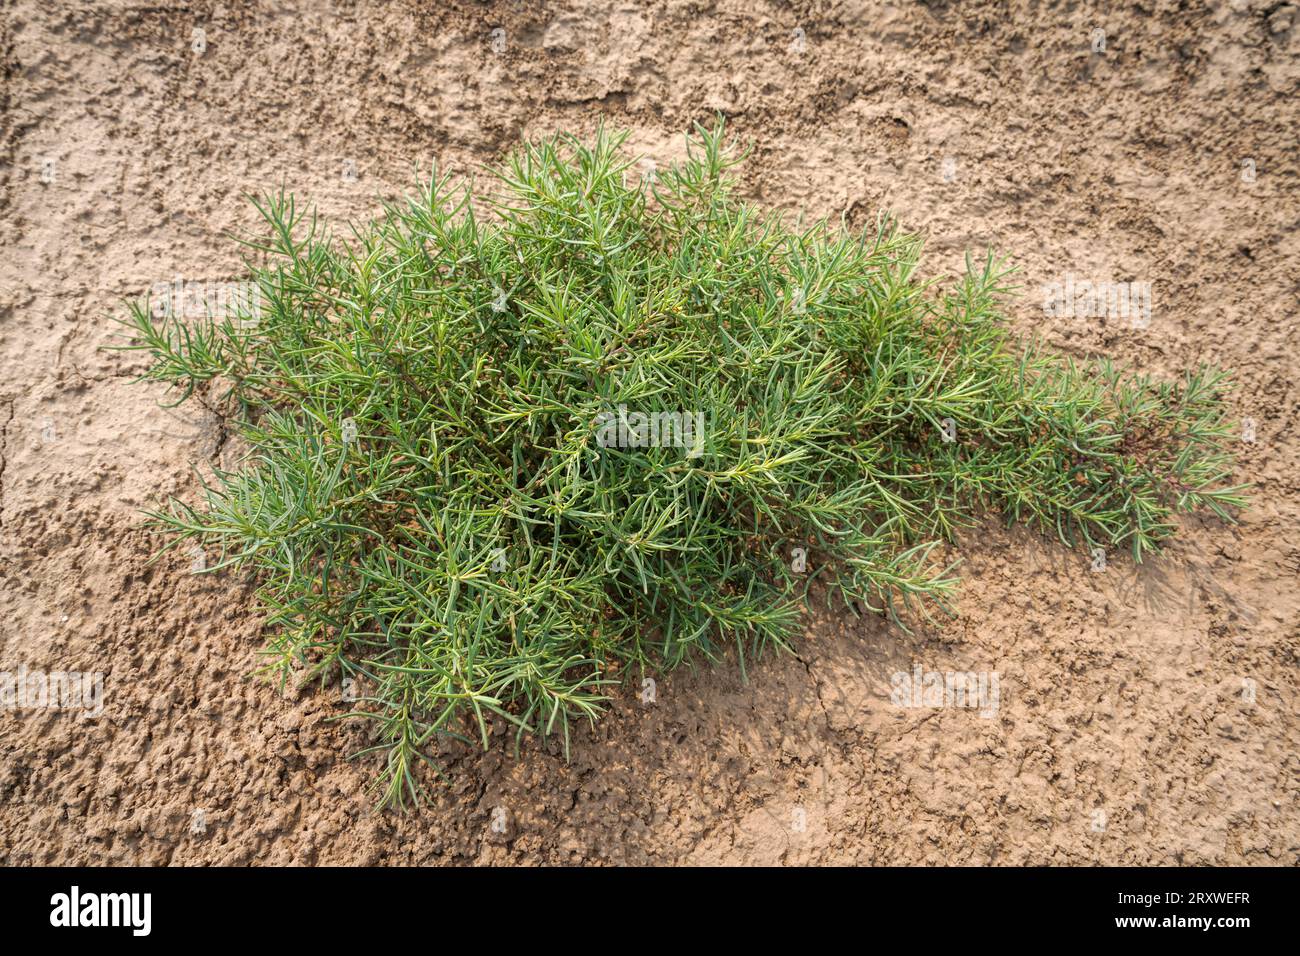 Suaeda salsa, an annual herbaceous plant in the Chenopodiaceae family Stock Photo